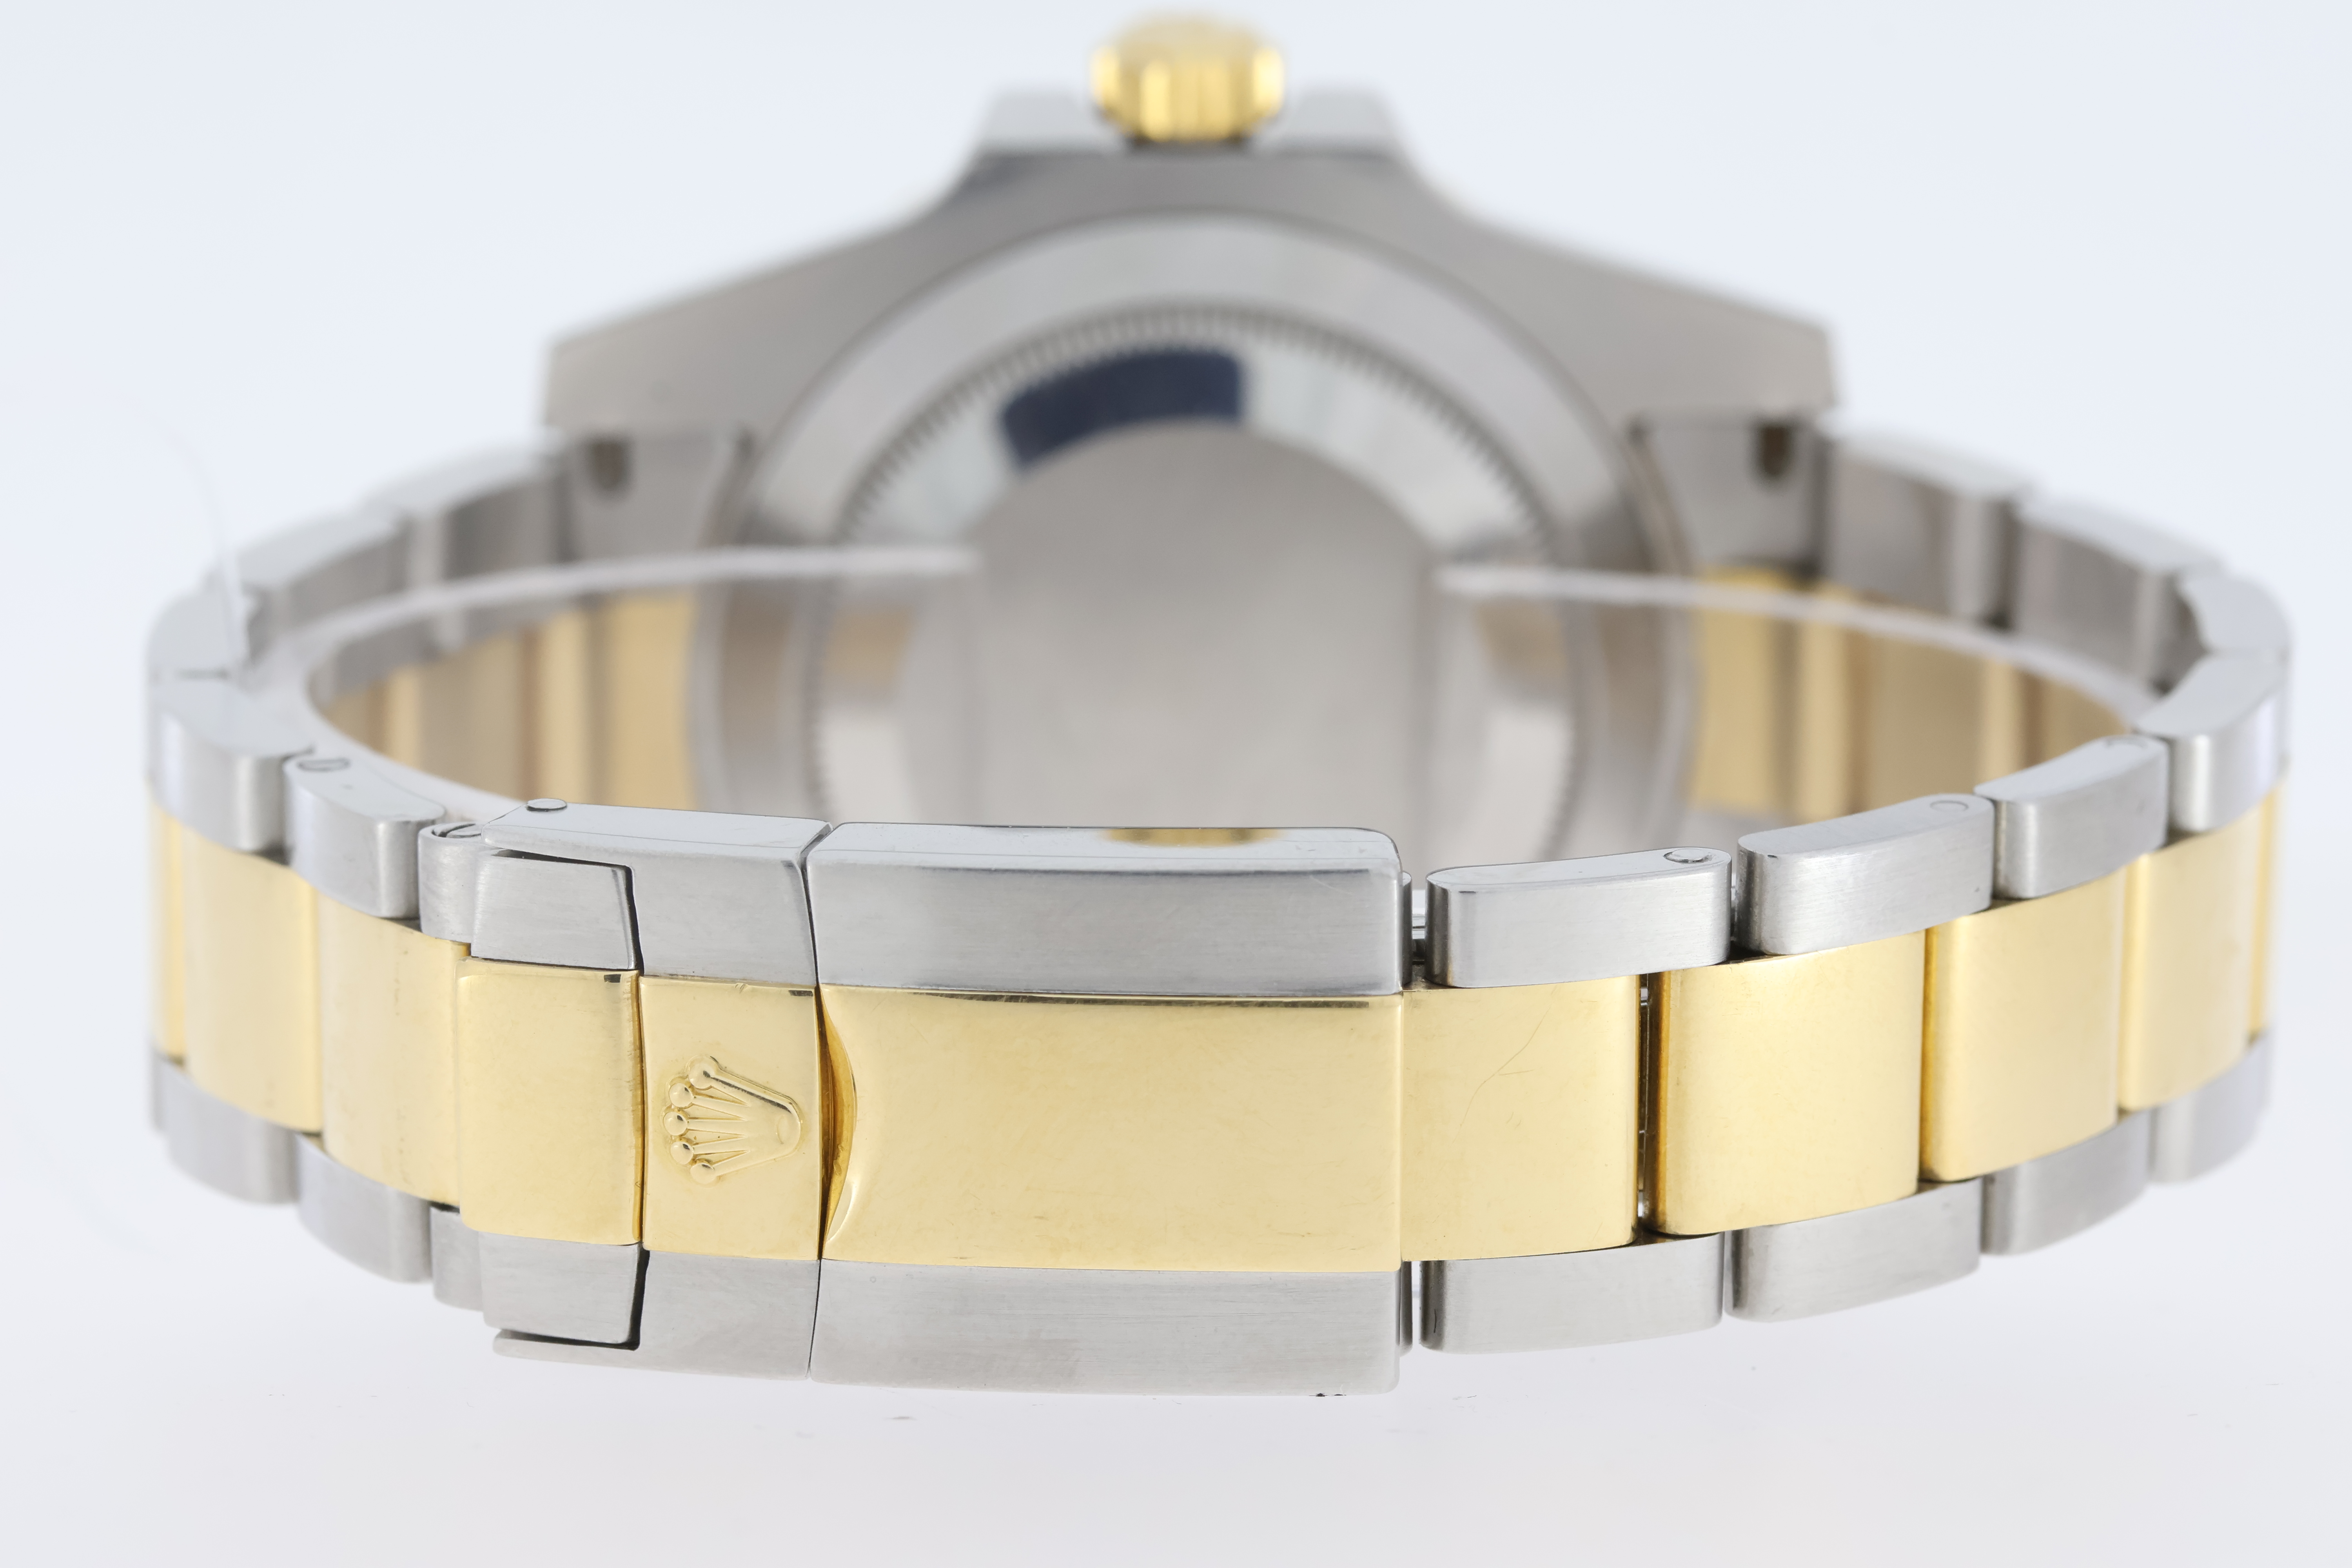 Rolex Submariner Date Reference 116613LN Steel and Gold - Image 6 of 8